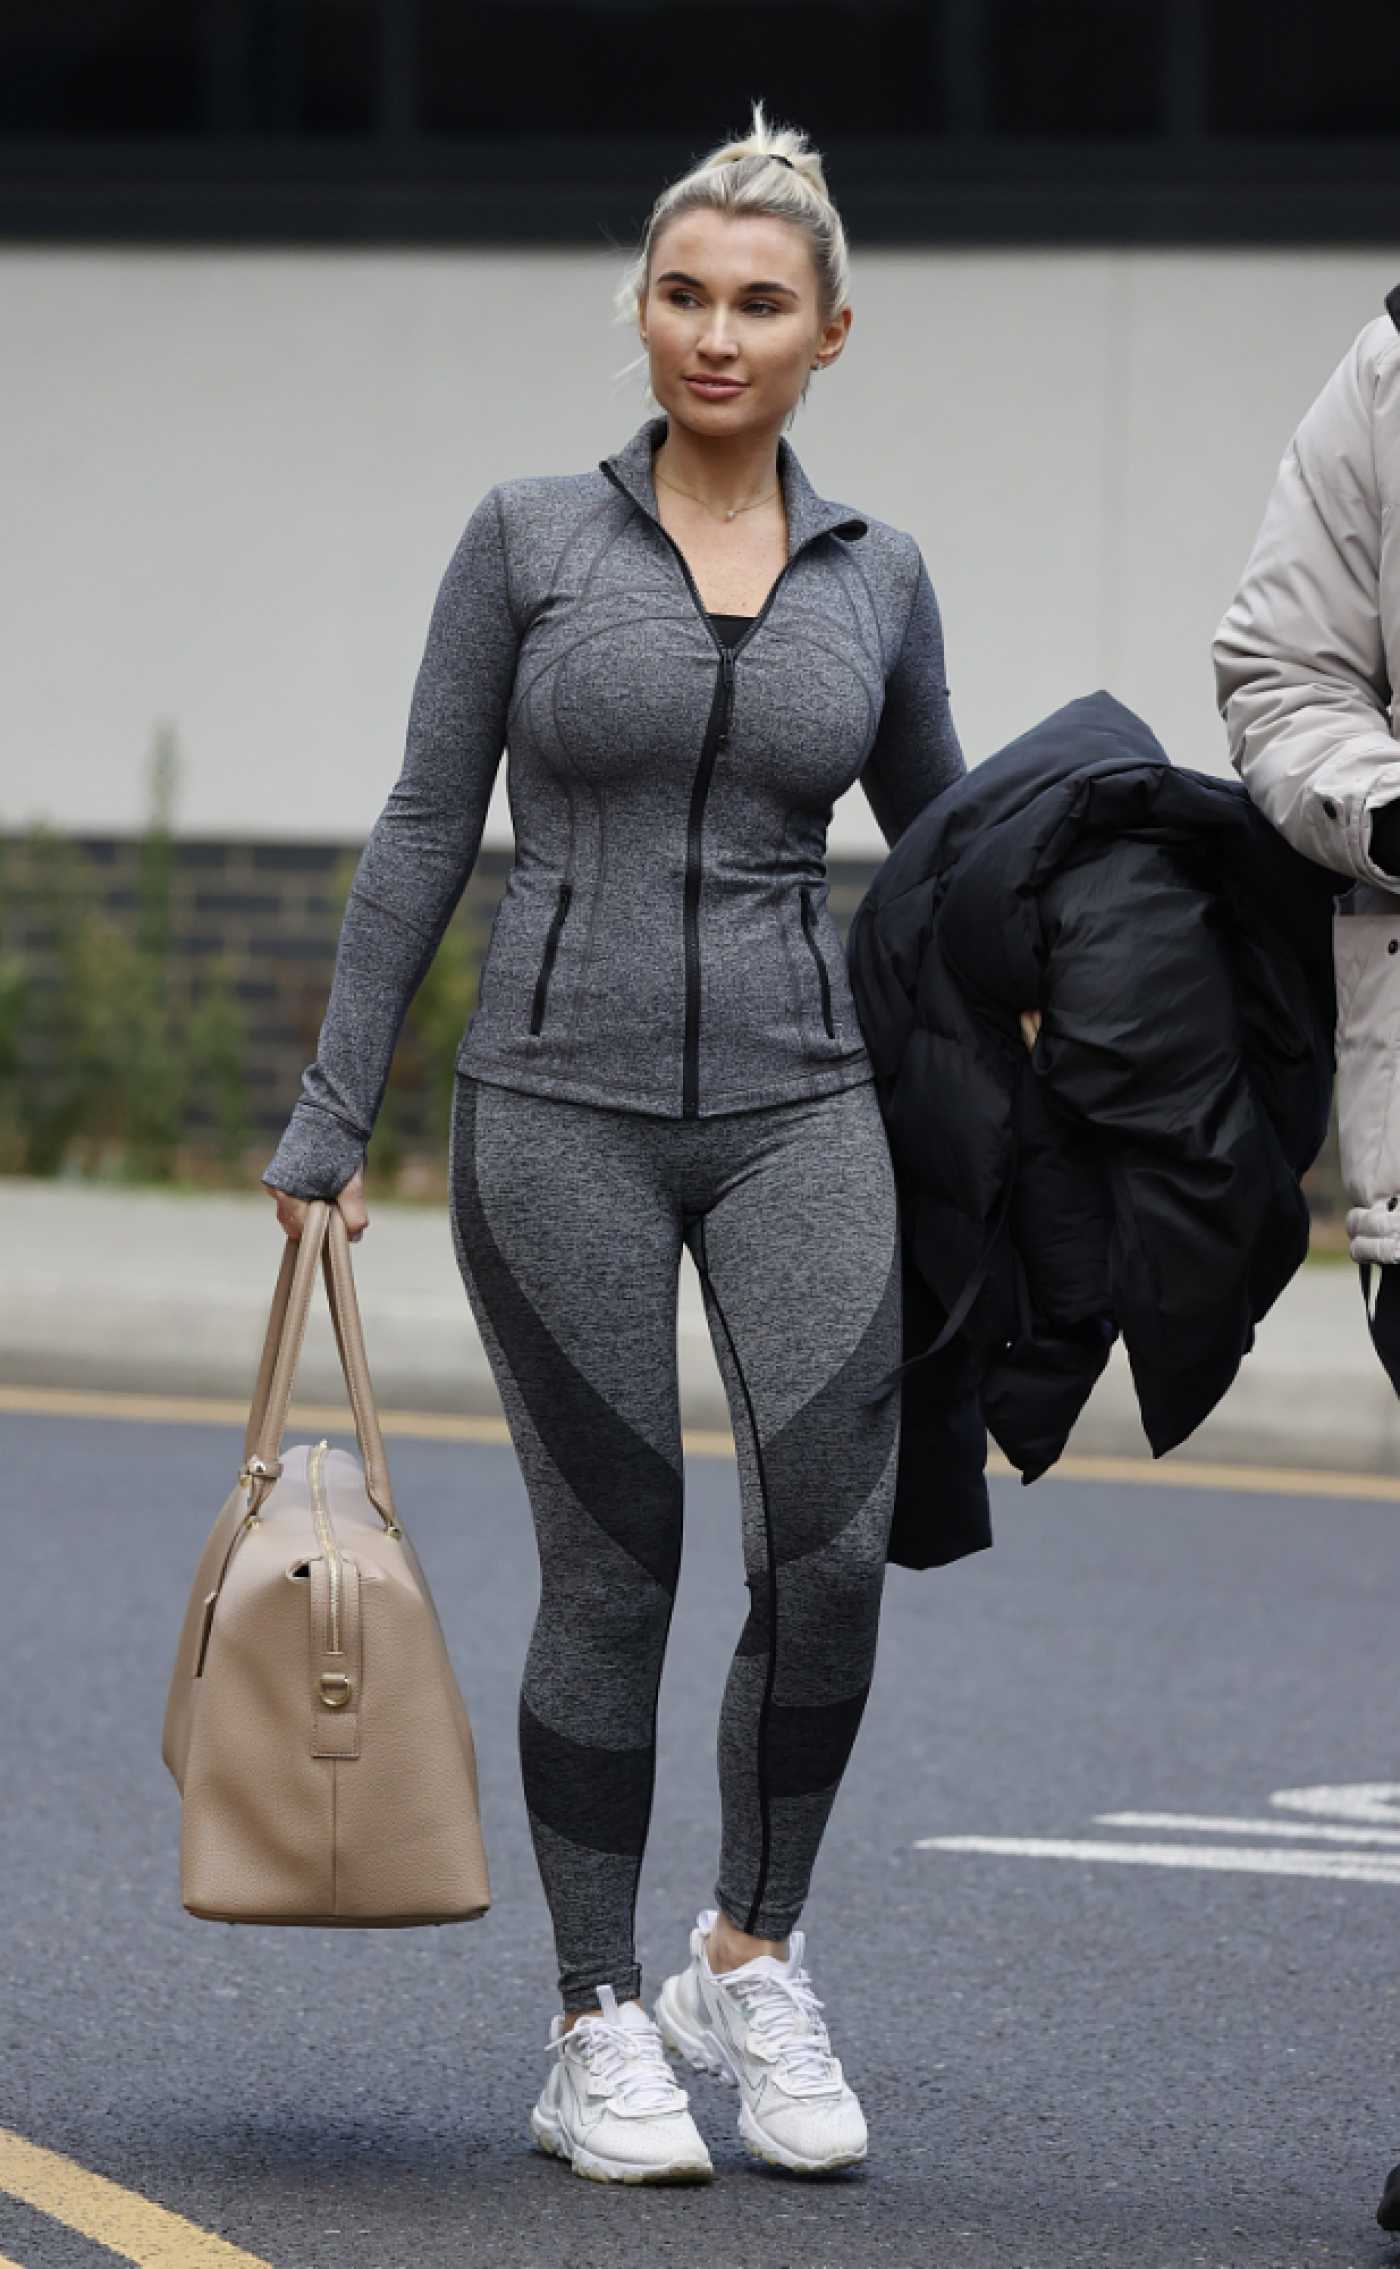 Billie Faiers in a Grey Workout Ensemble Leaves Ice Rink in Essex 11/26/2020